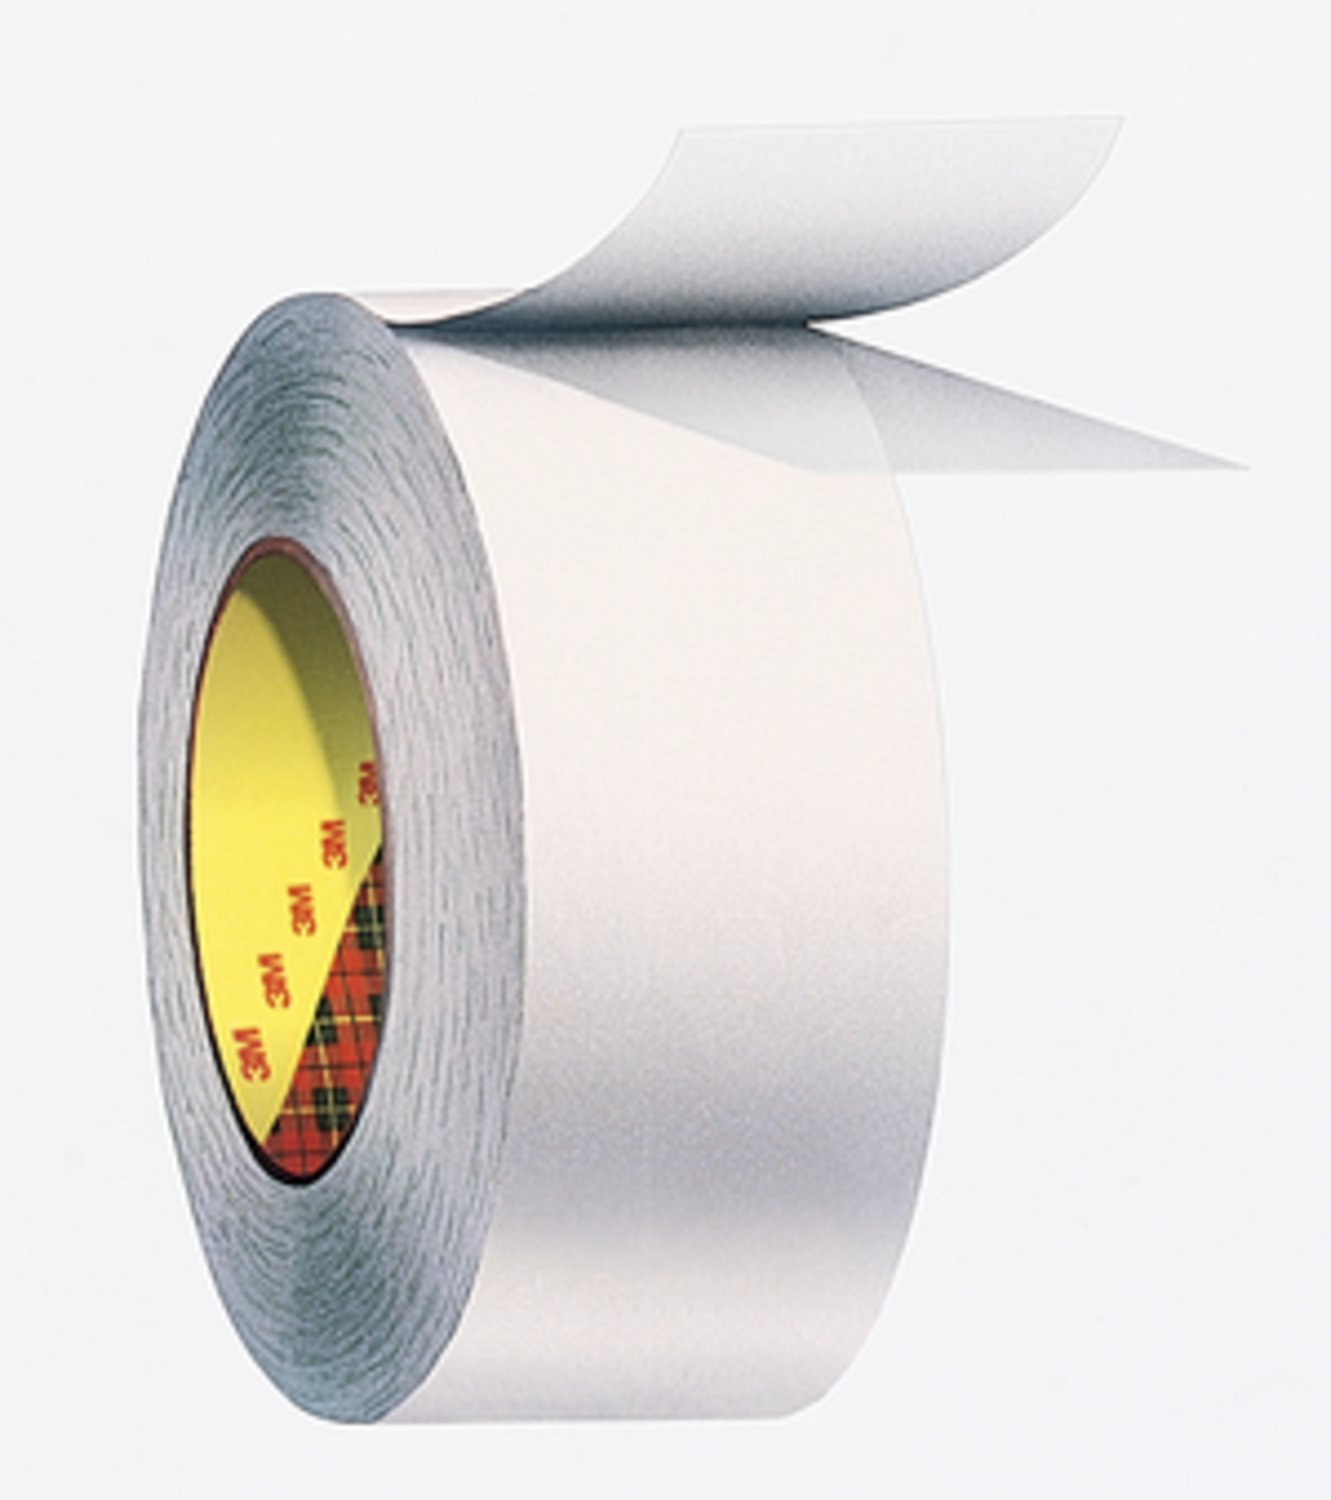 7010292819 - 3M Silicone Acrylic Differential Double Coated Tape 9699, Clear, 36 in
x 60 yd, 2 mil, 1 roll per case